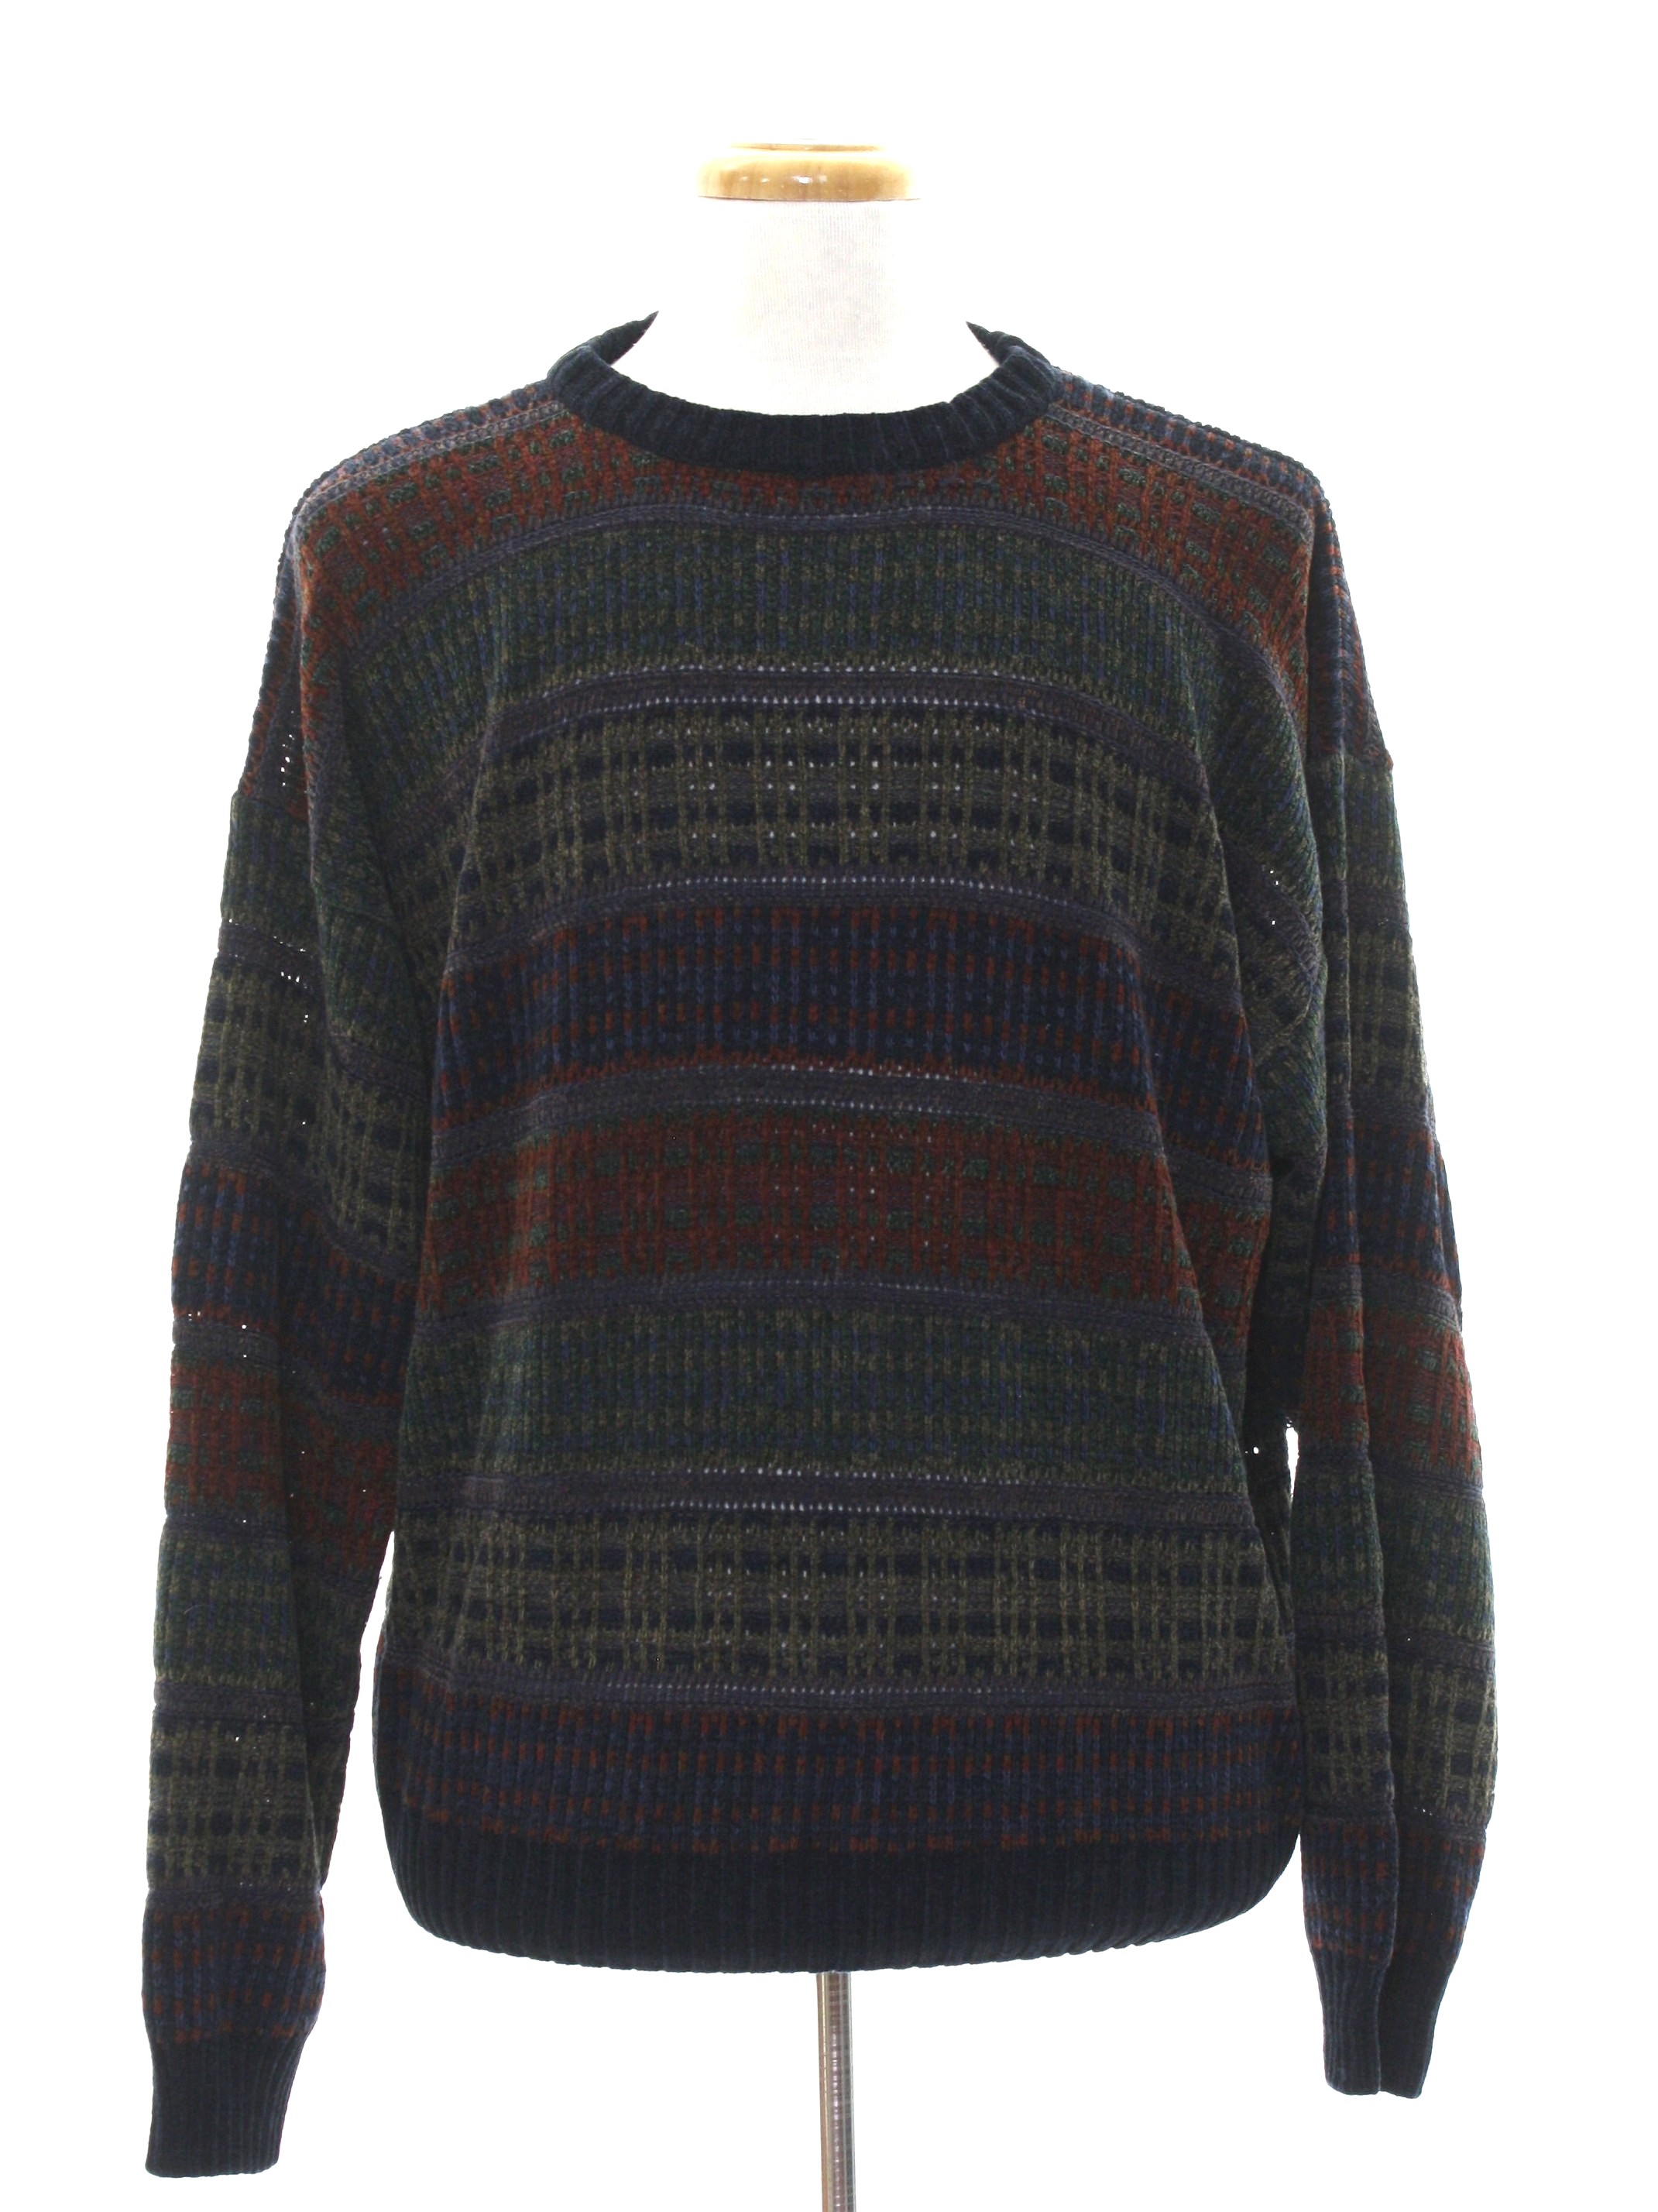 Vintage 80s Sweater: Late 80s or Early 90s -Geoffrey Beene- Mens